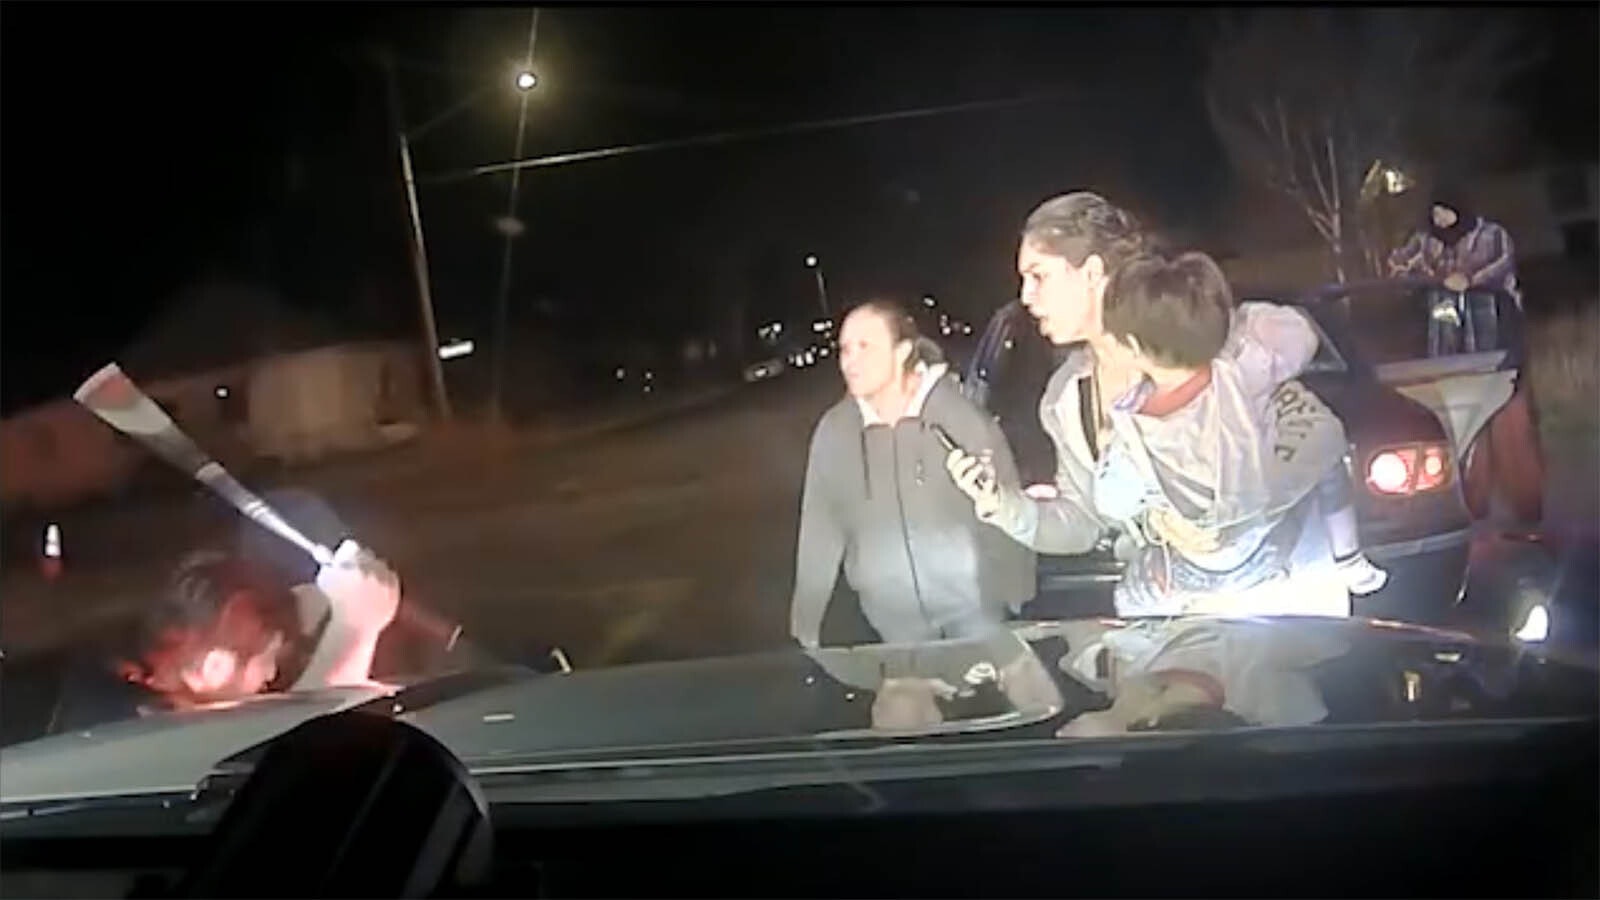 This screen capture from video released by the Cheyenne Police Department shows the altercation and arrest of a suspect that involved use of force.